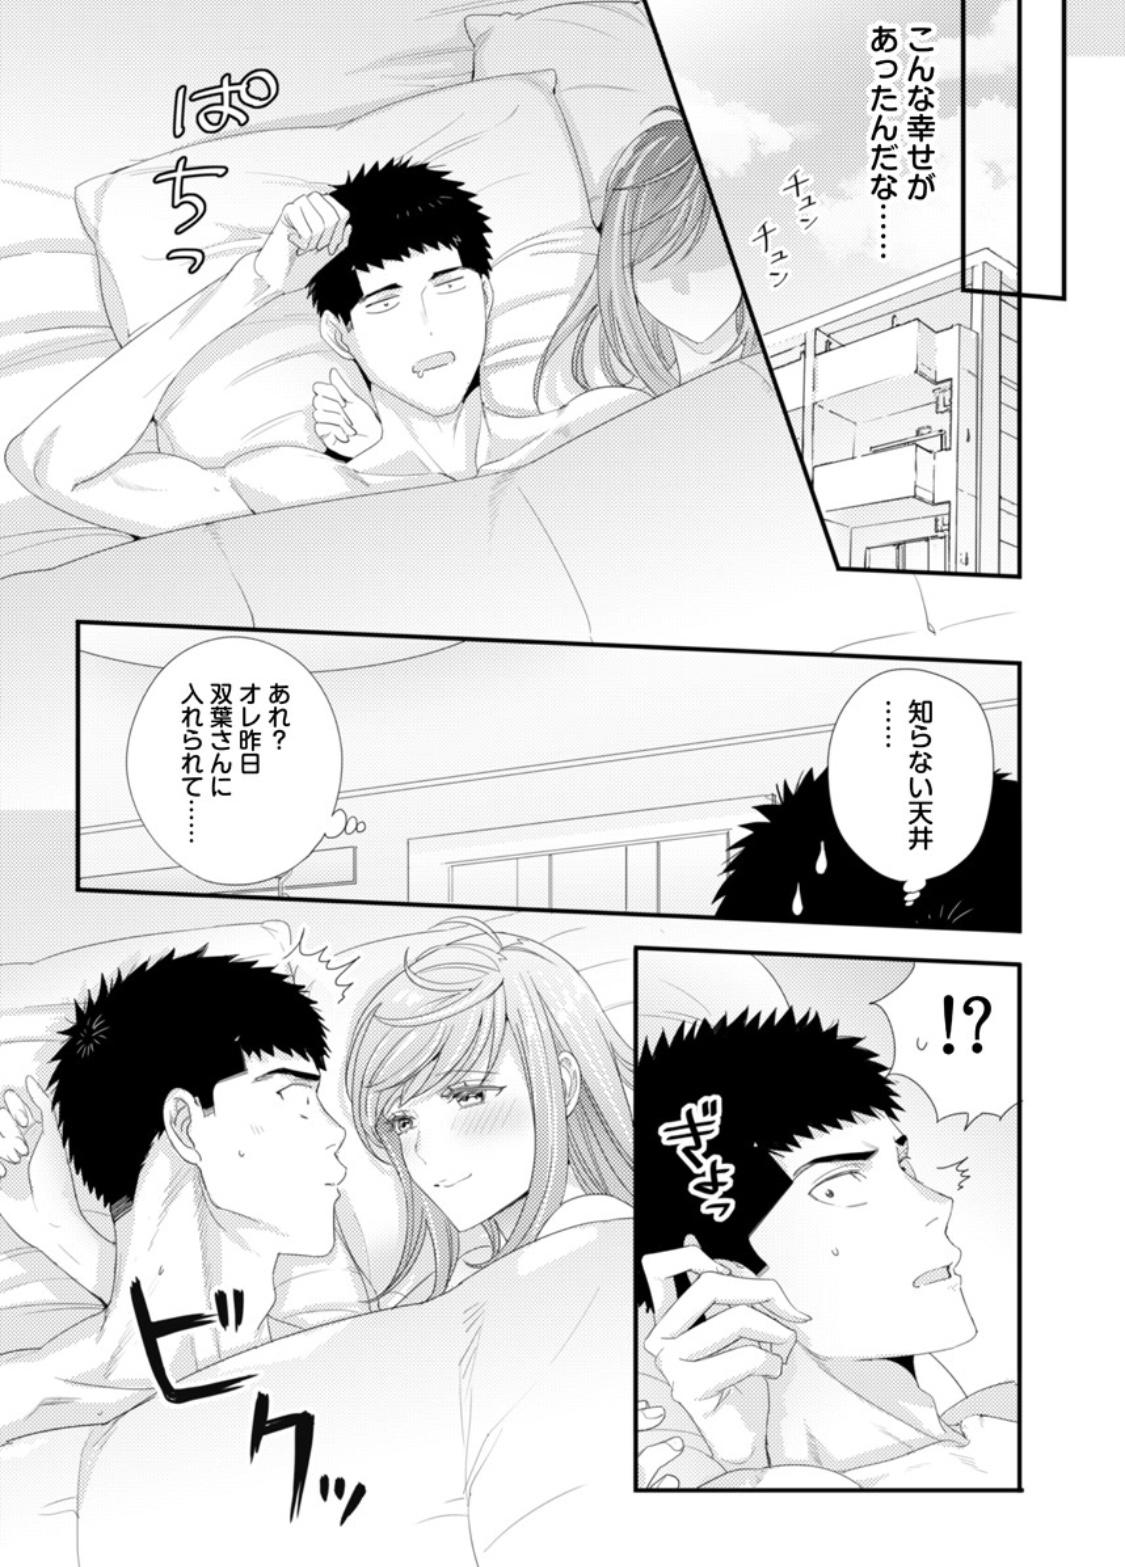 Please Let Me Hold You Futaba-San! Ch. 1+2 62